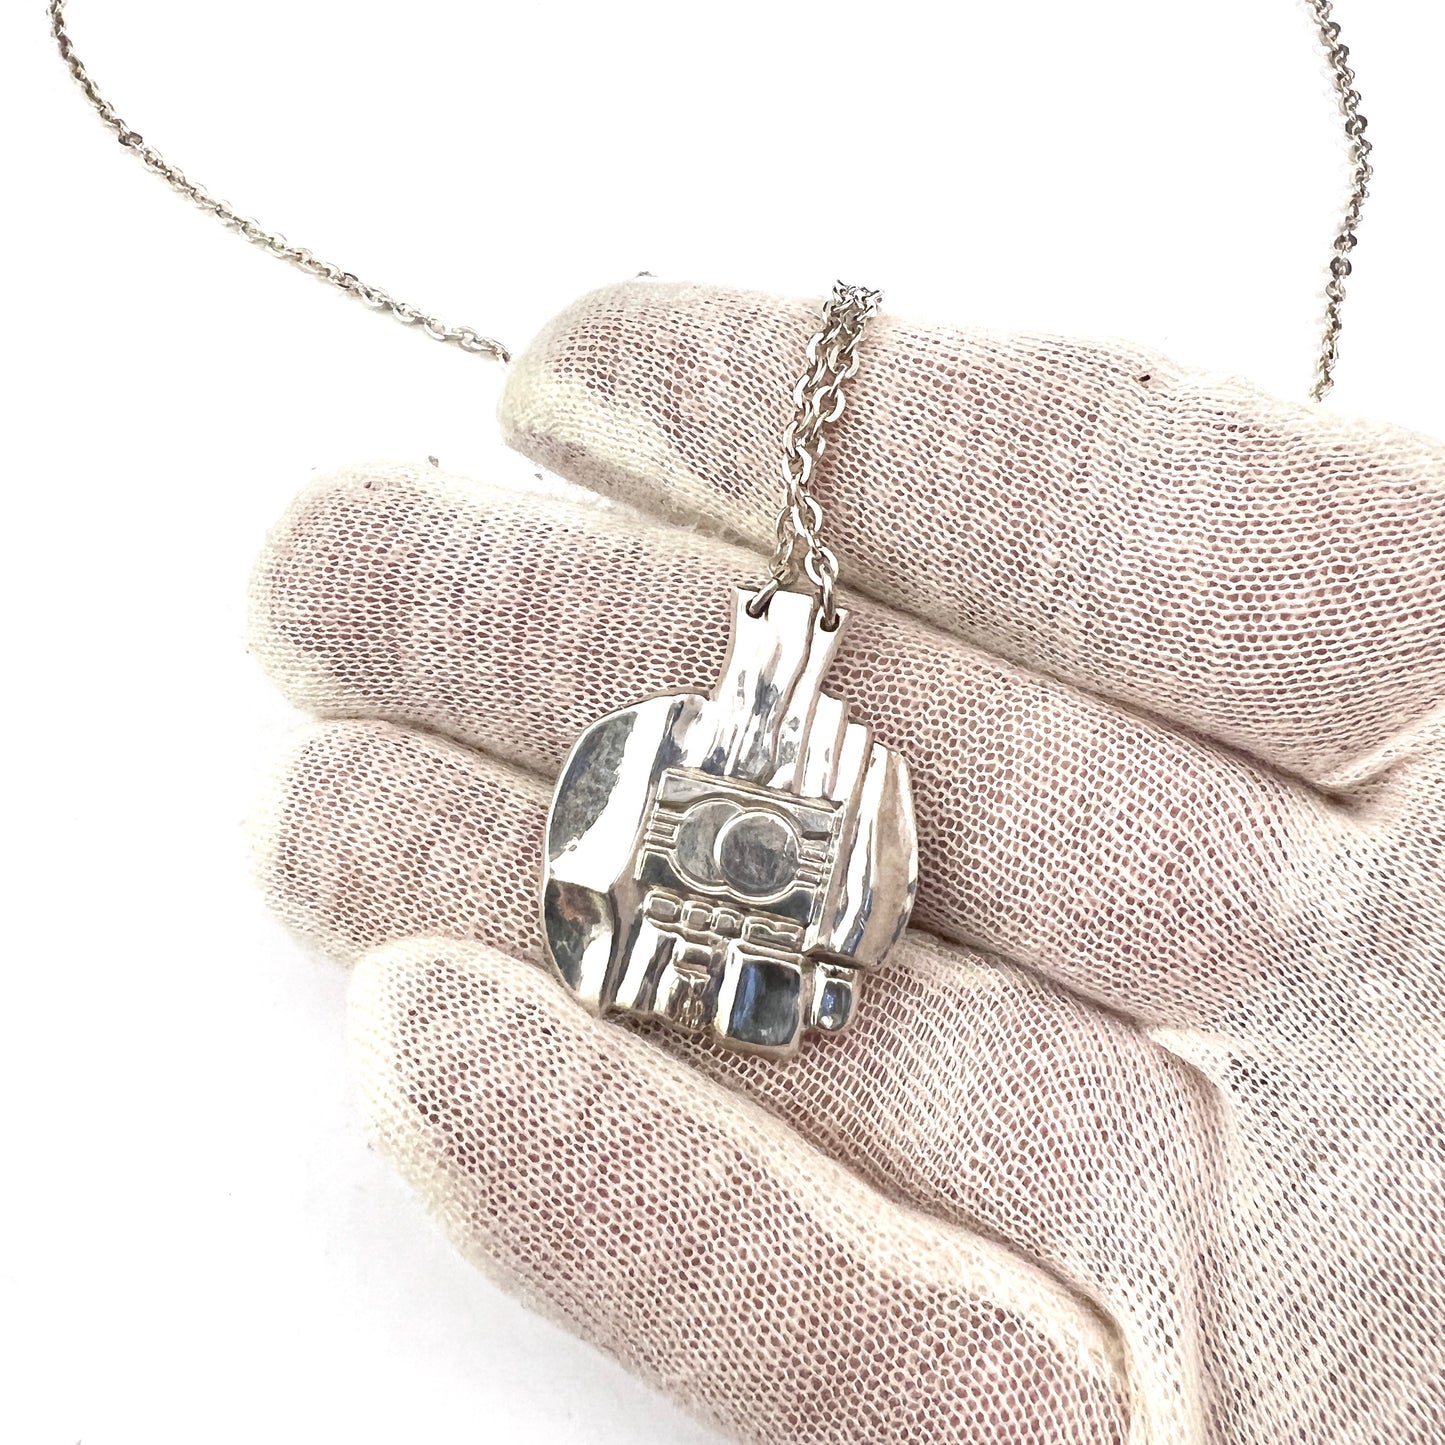 Sporrong, Sweden 1975. Vintage Solid Silver Pendant Long Chain Necklace.